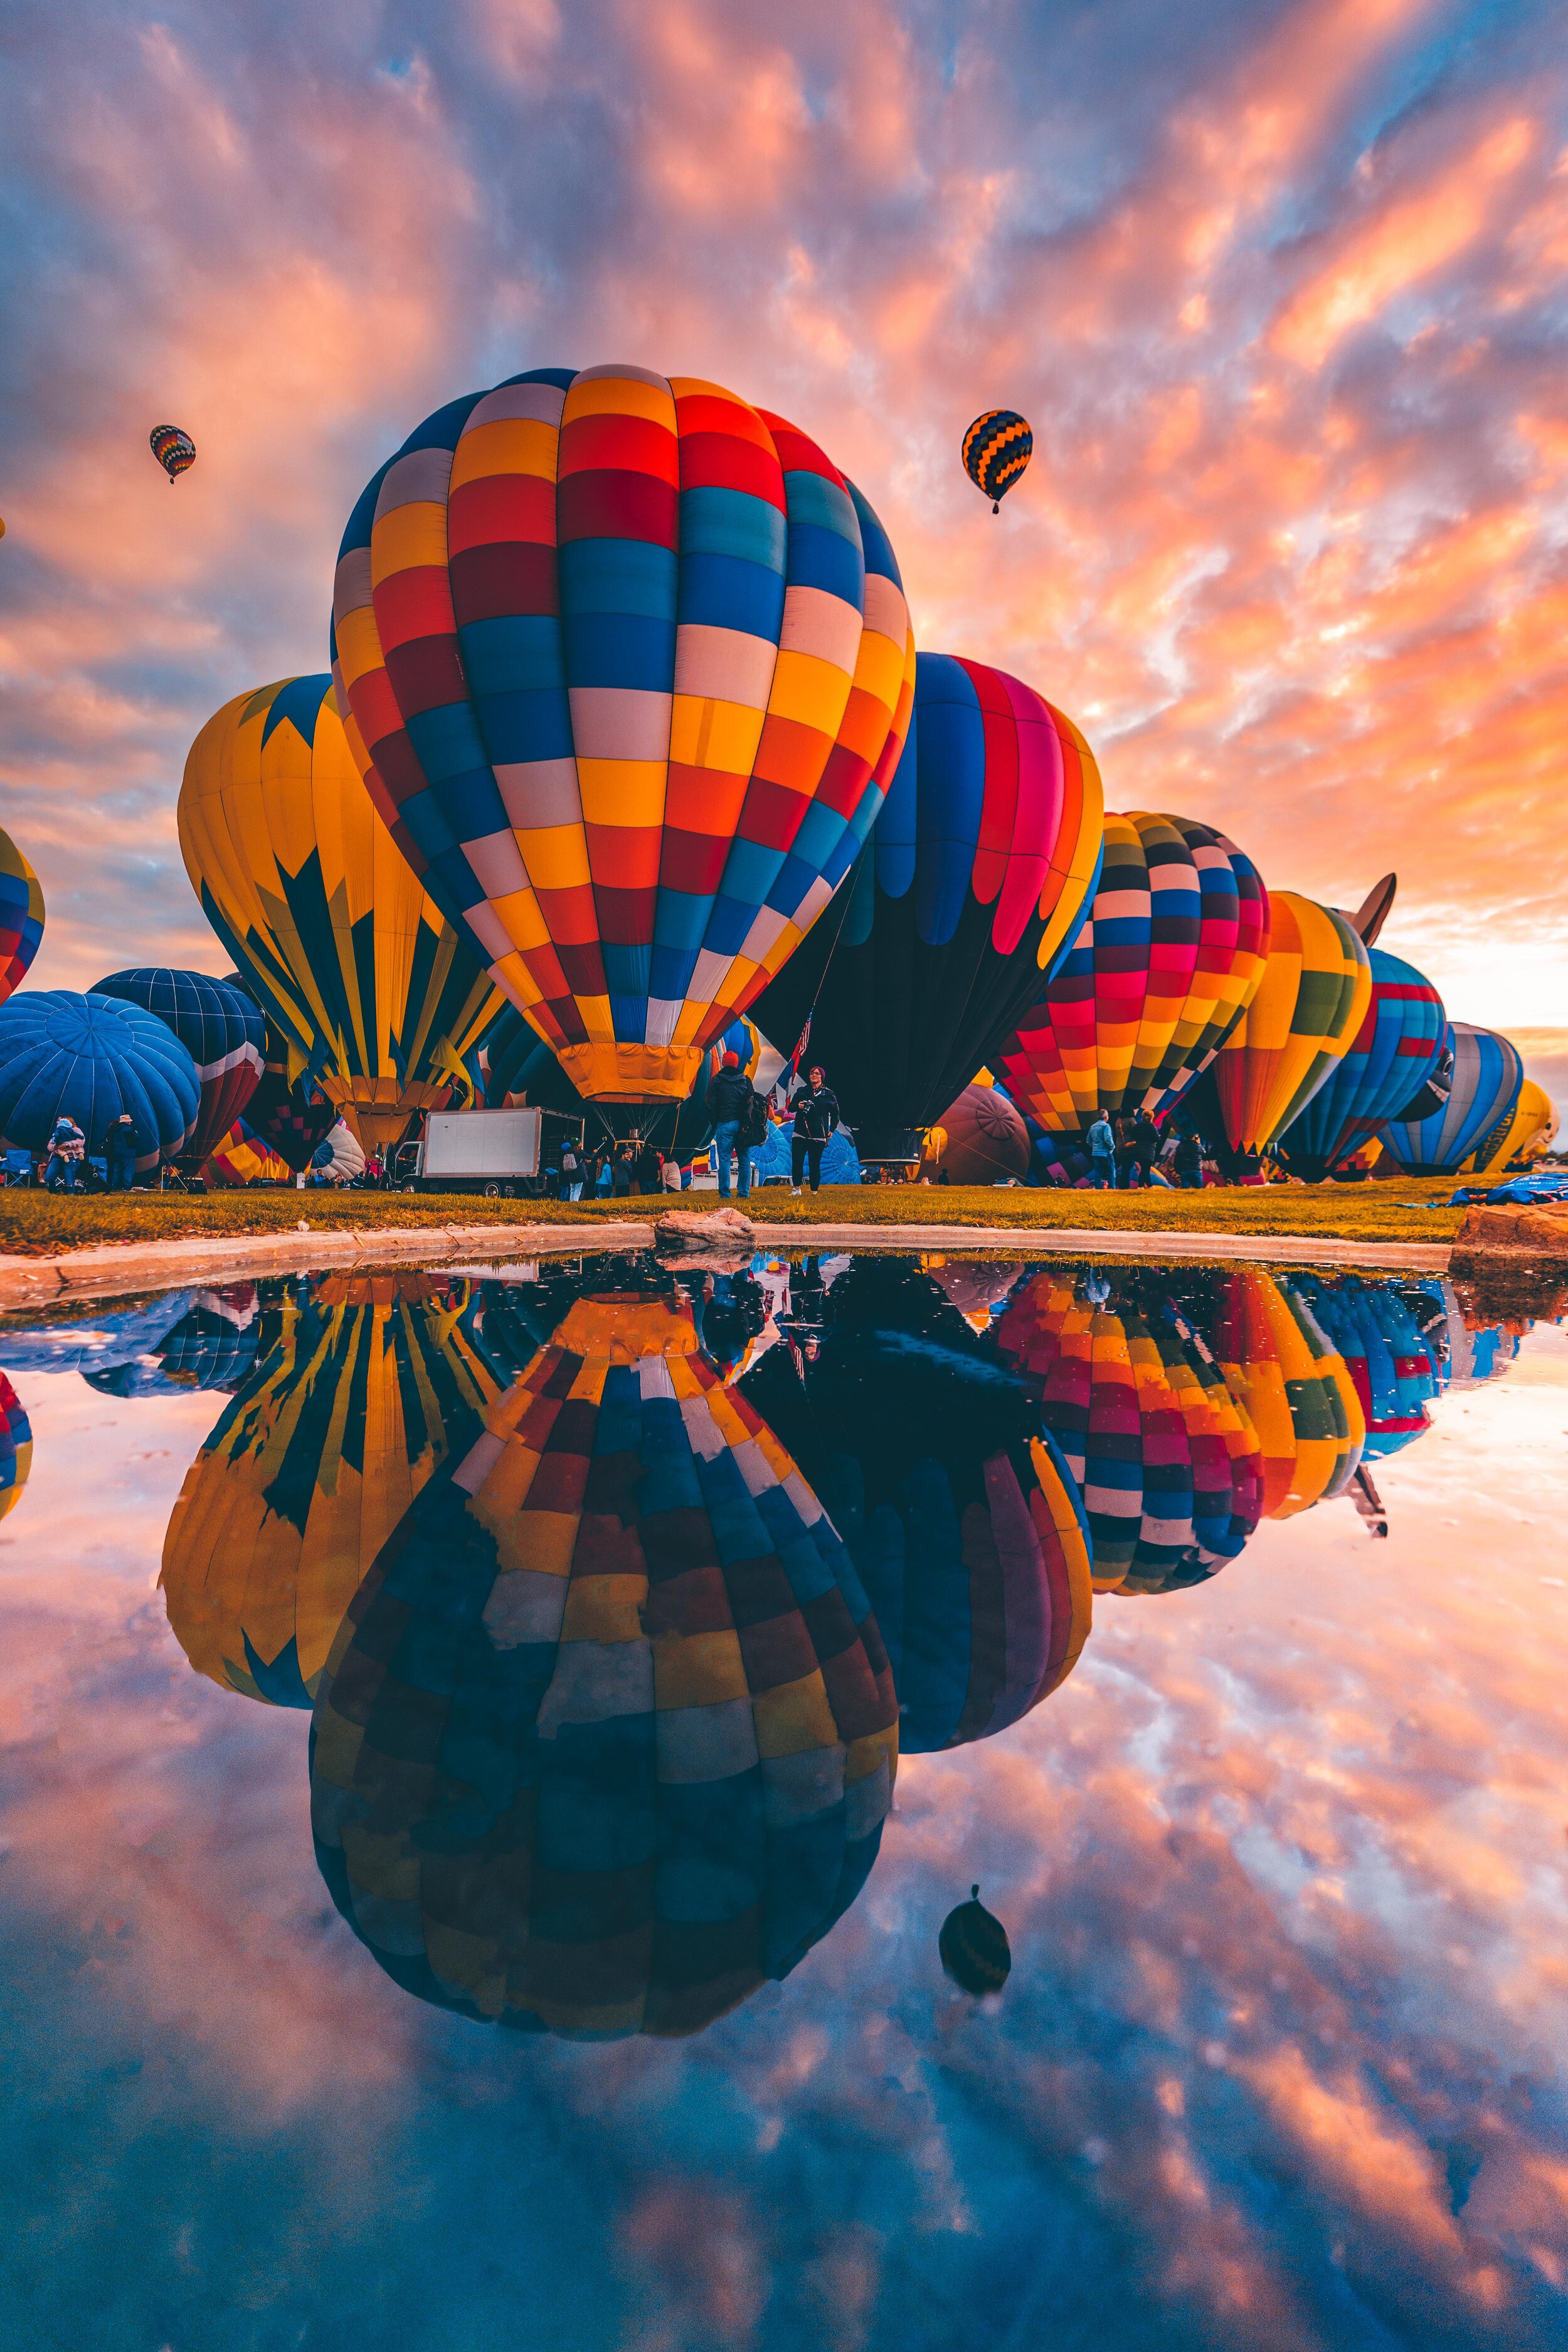 jukbeen inval Hardheid The Air Before - Balloon Fiesta in Albuquerque — The Journal of Lost Time